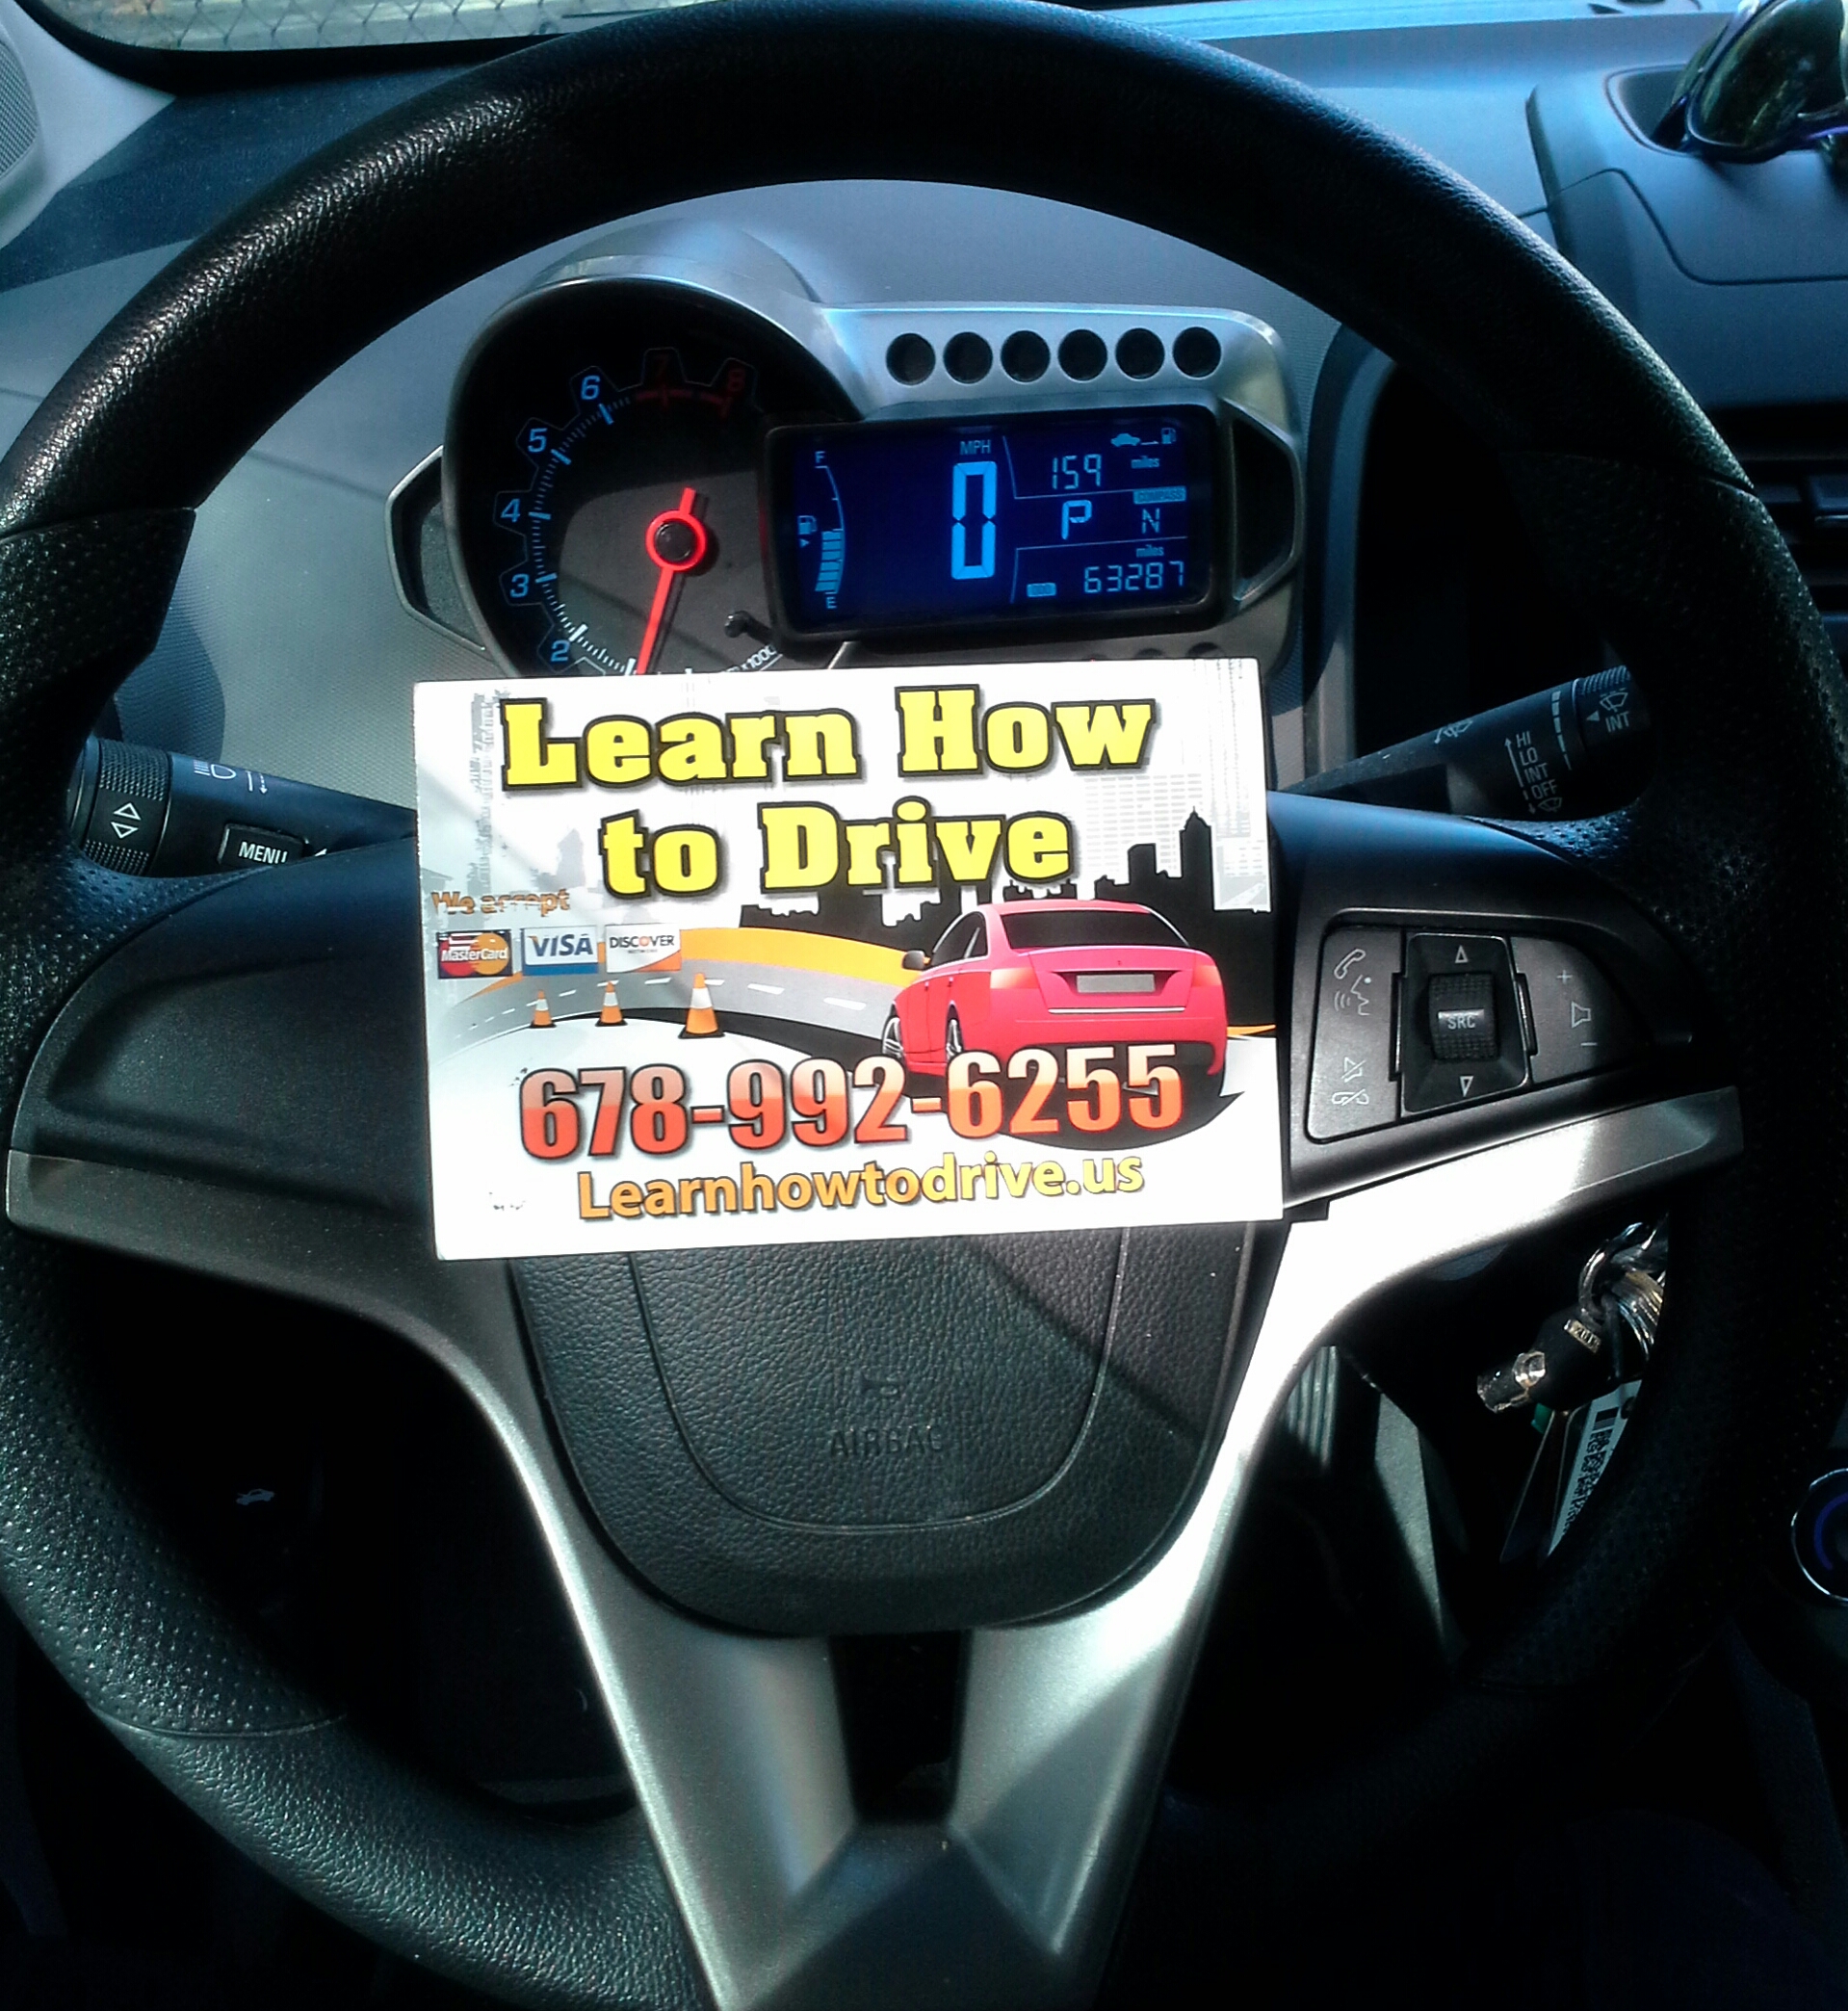 Choose The Intensive Driving Course That - LearnDrive